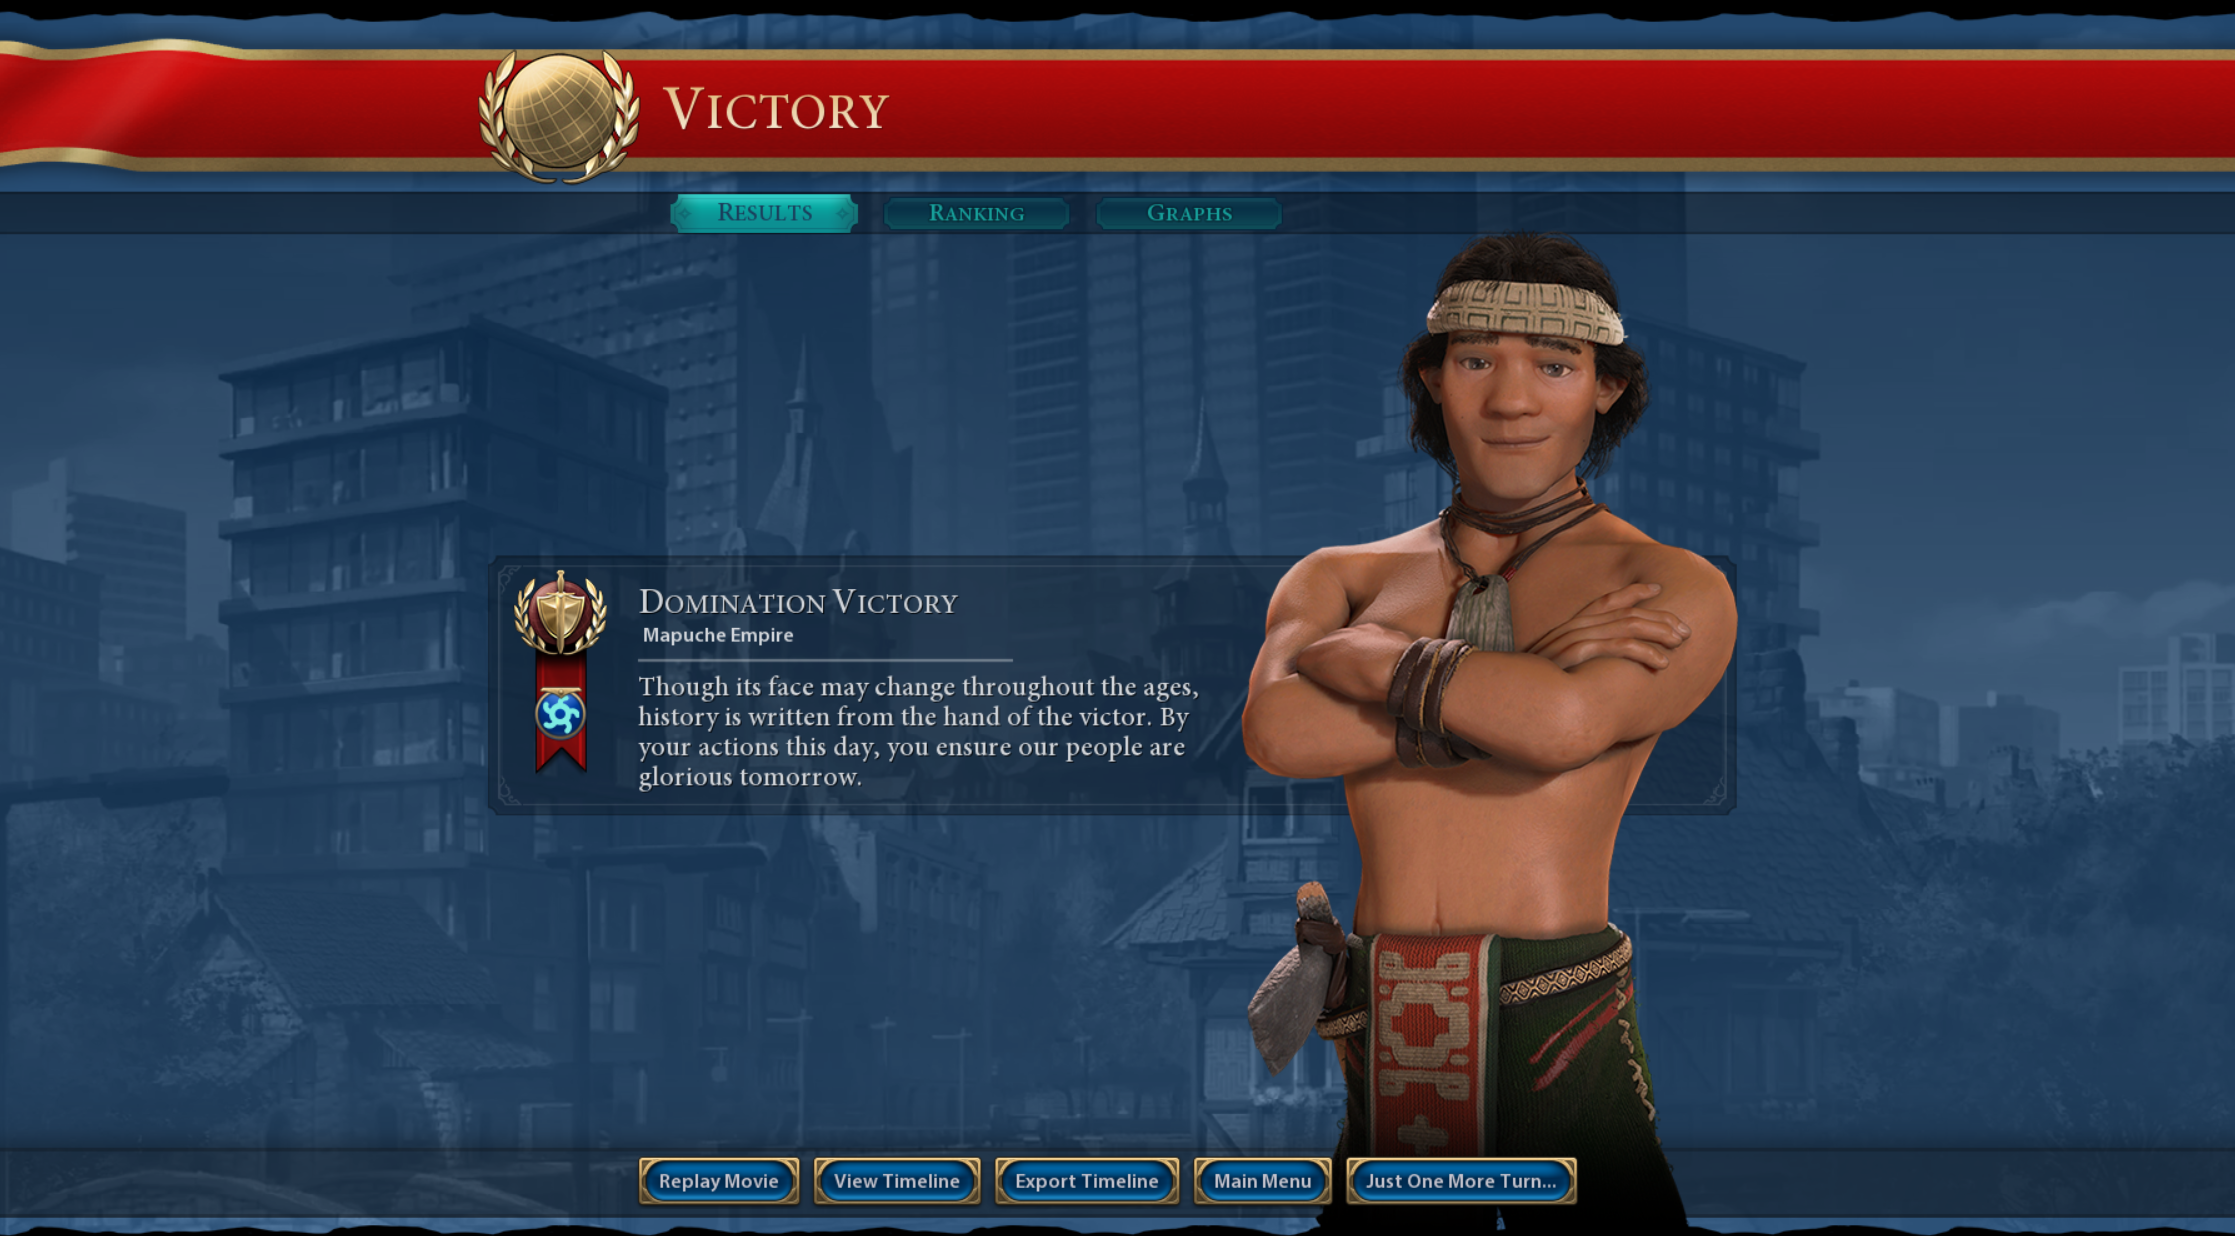 Civ 6 victory screen showing a domination victory for the Mapuche